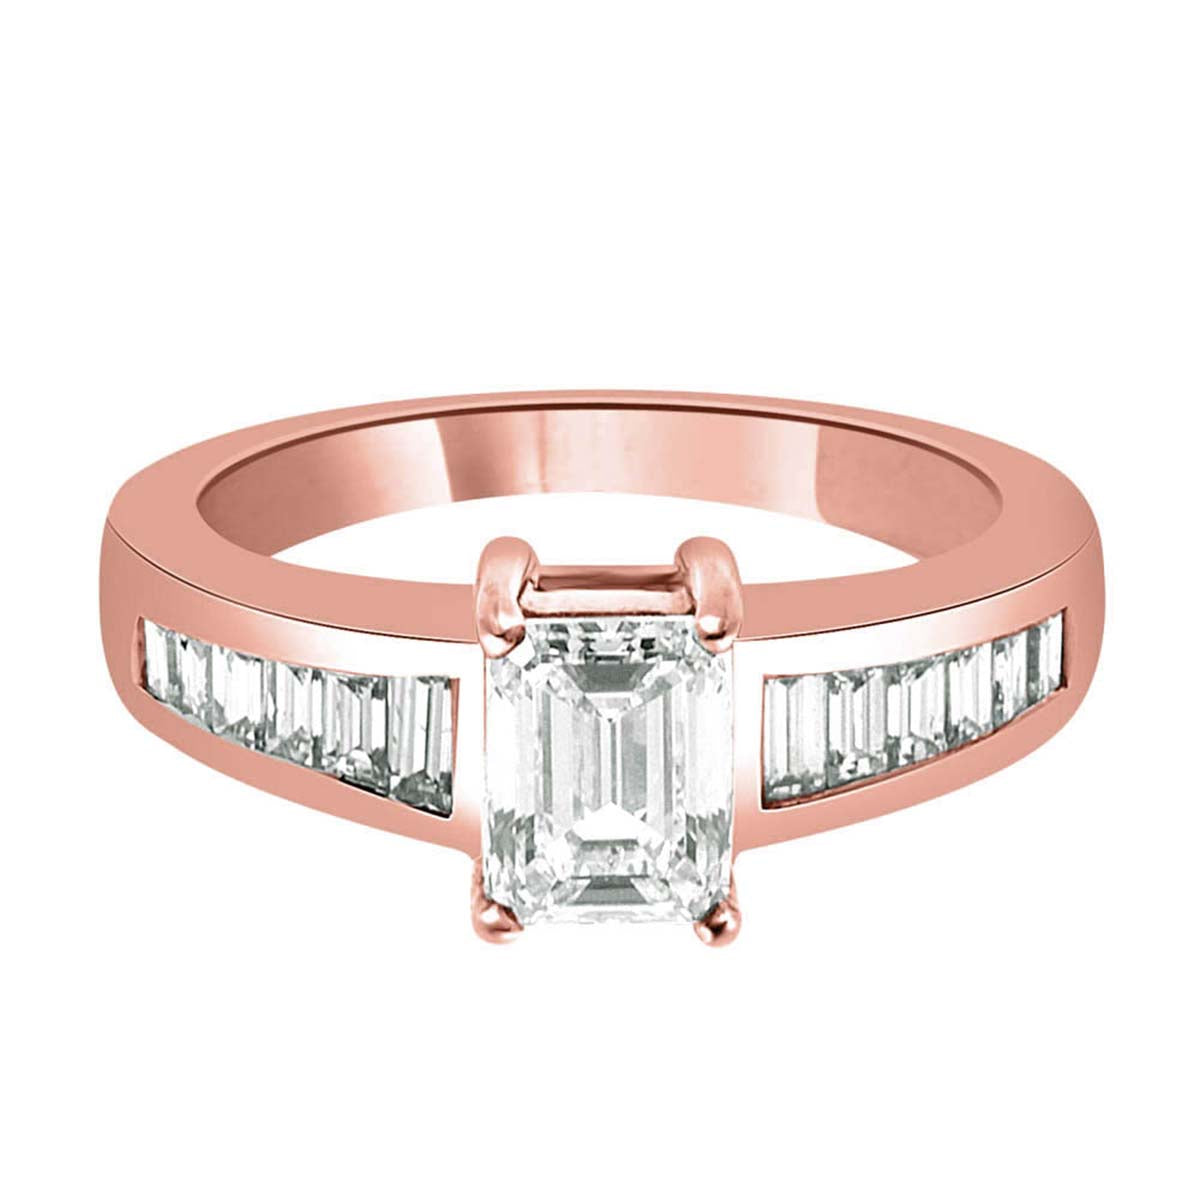 Emerald Cut Engagement Ring made from rose gold laying flat